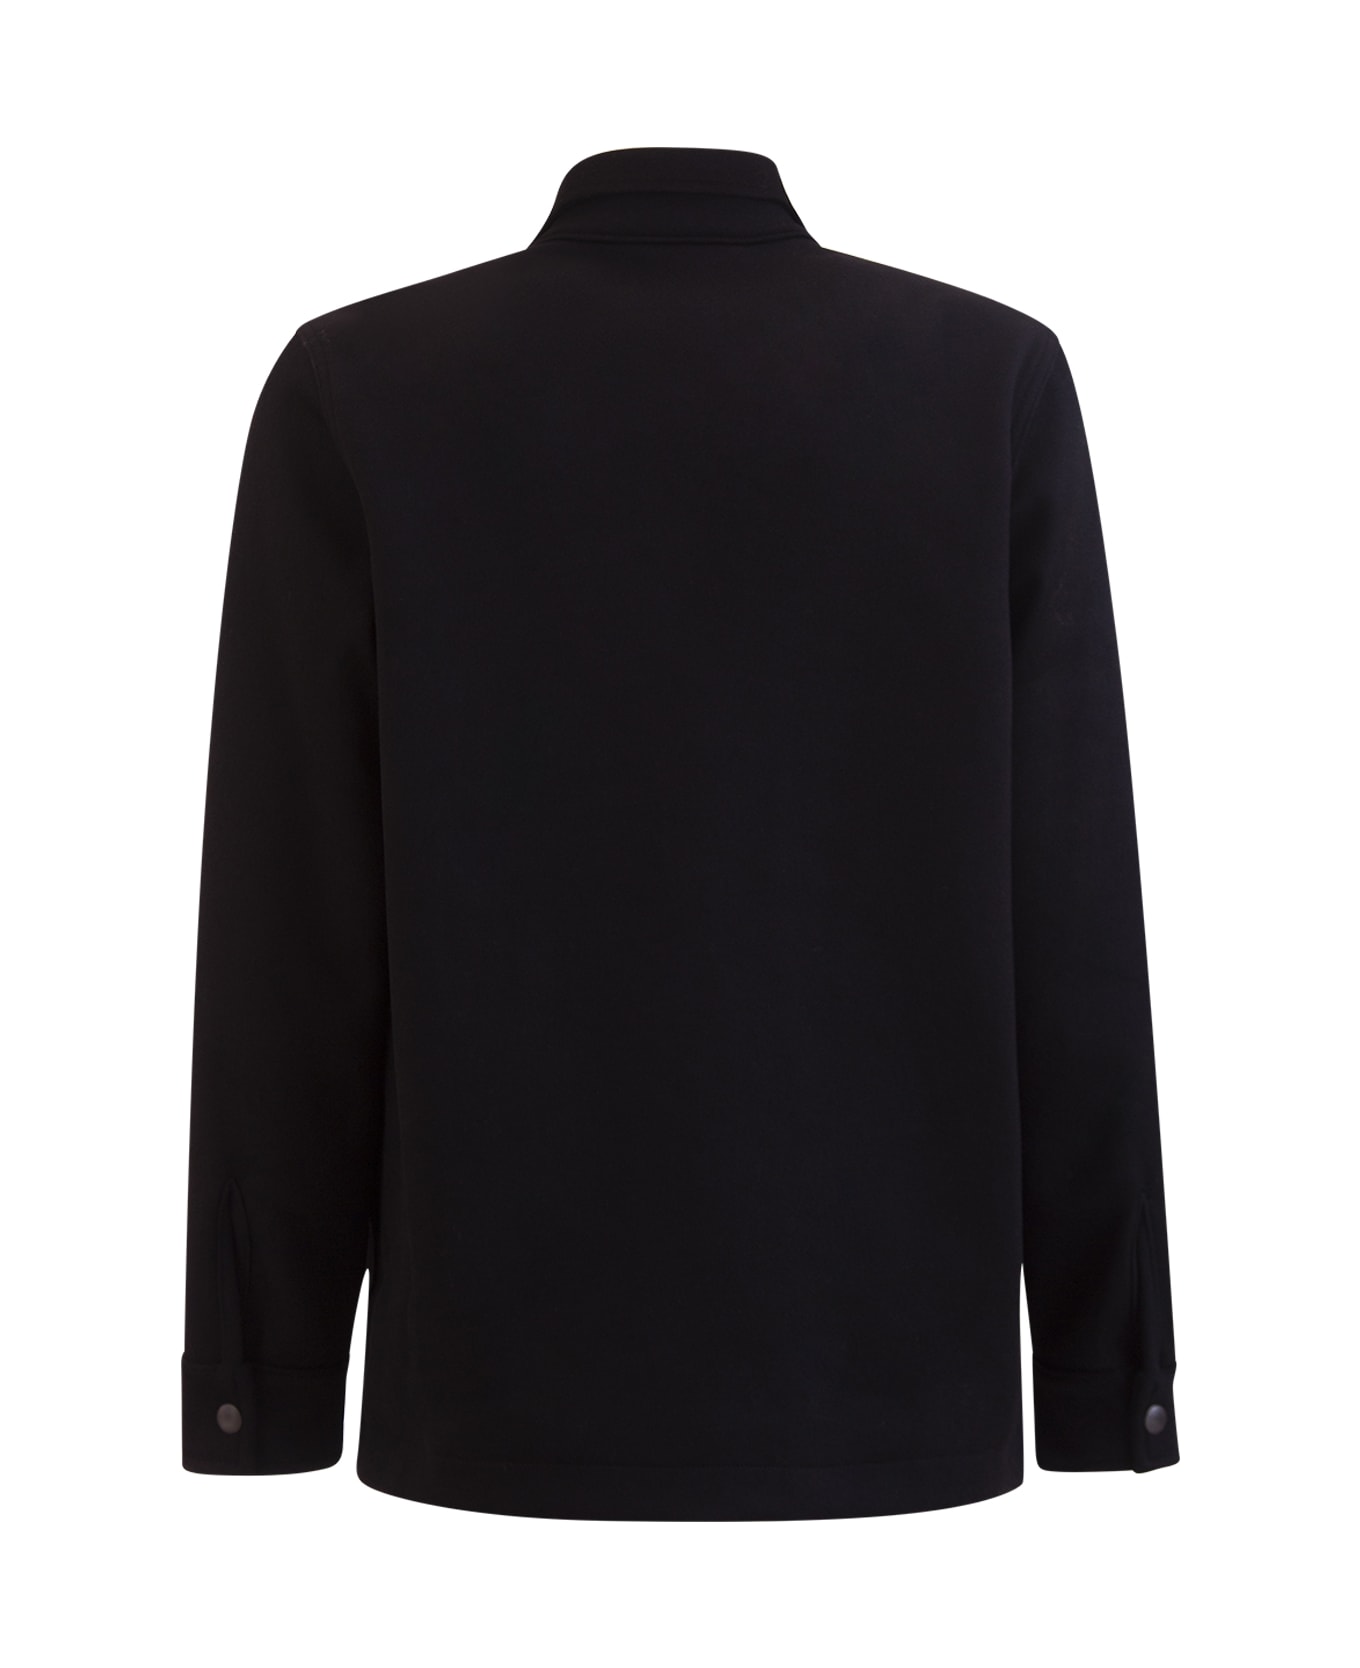 Department Five Jacket With Iconic Pins Department Five - BLACK